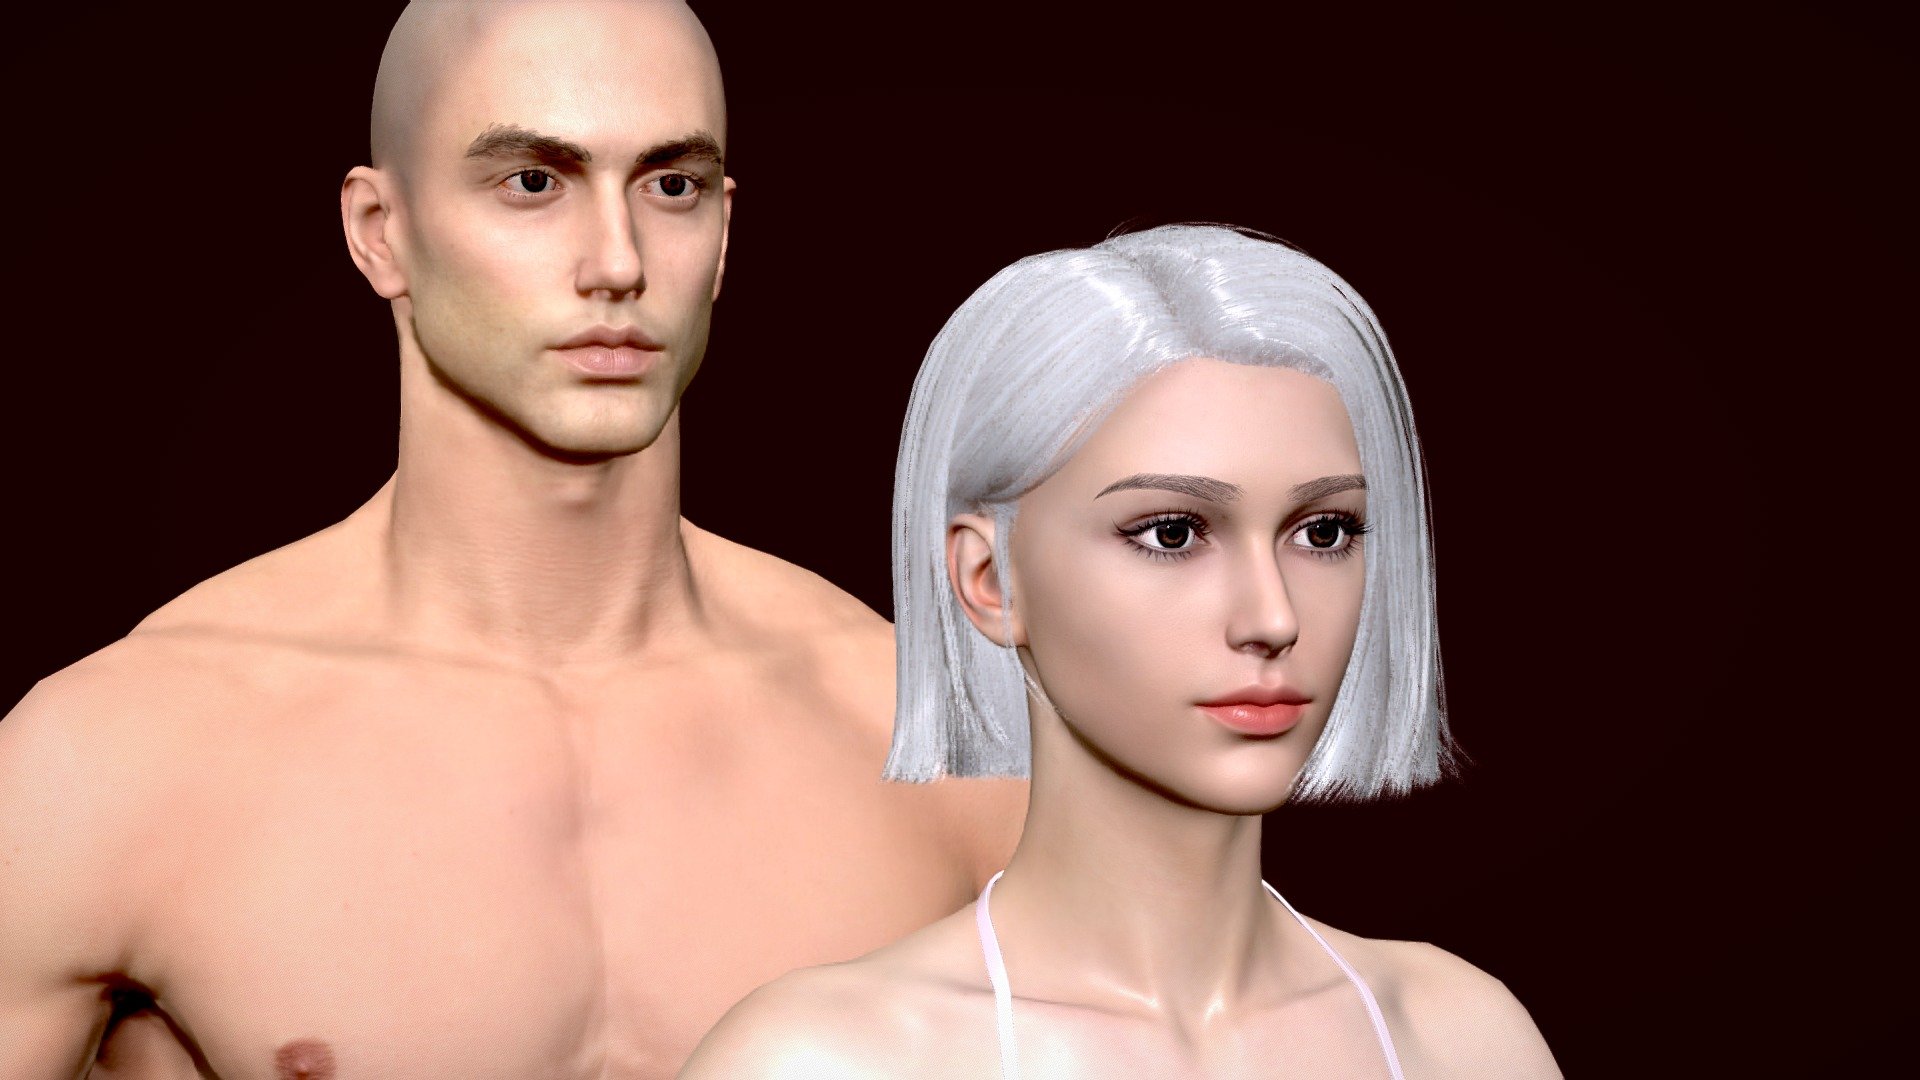 Caucasian Realistic character man woman child Game Assets 3D model

Highpoly zbrush ztl format please visit : https://www.artstation.com/a/21590959

Model Includes: -maya(2019) -FBX exported from maya -dea files -obj files-Marmoset Toolbag 4 project with render setup -Textures in rar file.

Textures Includes:dIffuse specular gloss and Normal map PBR pipeline .

Head texture：4096*4096 contains：dIffuse specular gloss and Normal map PBR pipeline .

Body texture：4096*4096 contains：dIffuse specular gloss and Normal map PBR pipeline .

Eye textures:512*512 contains：dIffuse Normal map Height PBR pipeline .

Woman hair textures:2048*2048 contains：dIffuse Normal map PBR pipeline .

Brows textures:512*512 dIffuse and opcity map

Eyelash:512*512 dIffuse and opcity map

Hope you like my like,cheers~ - Caucasian Realistic man woman GameAssets - Buy Royalty Free 3D model by Vincent Page (@vincentpage) 3d model